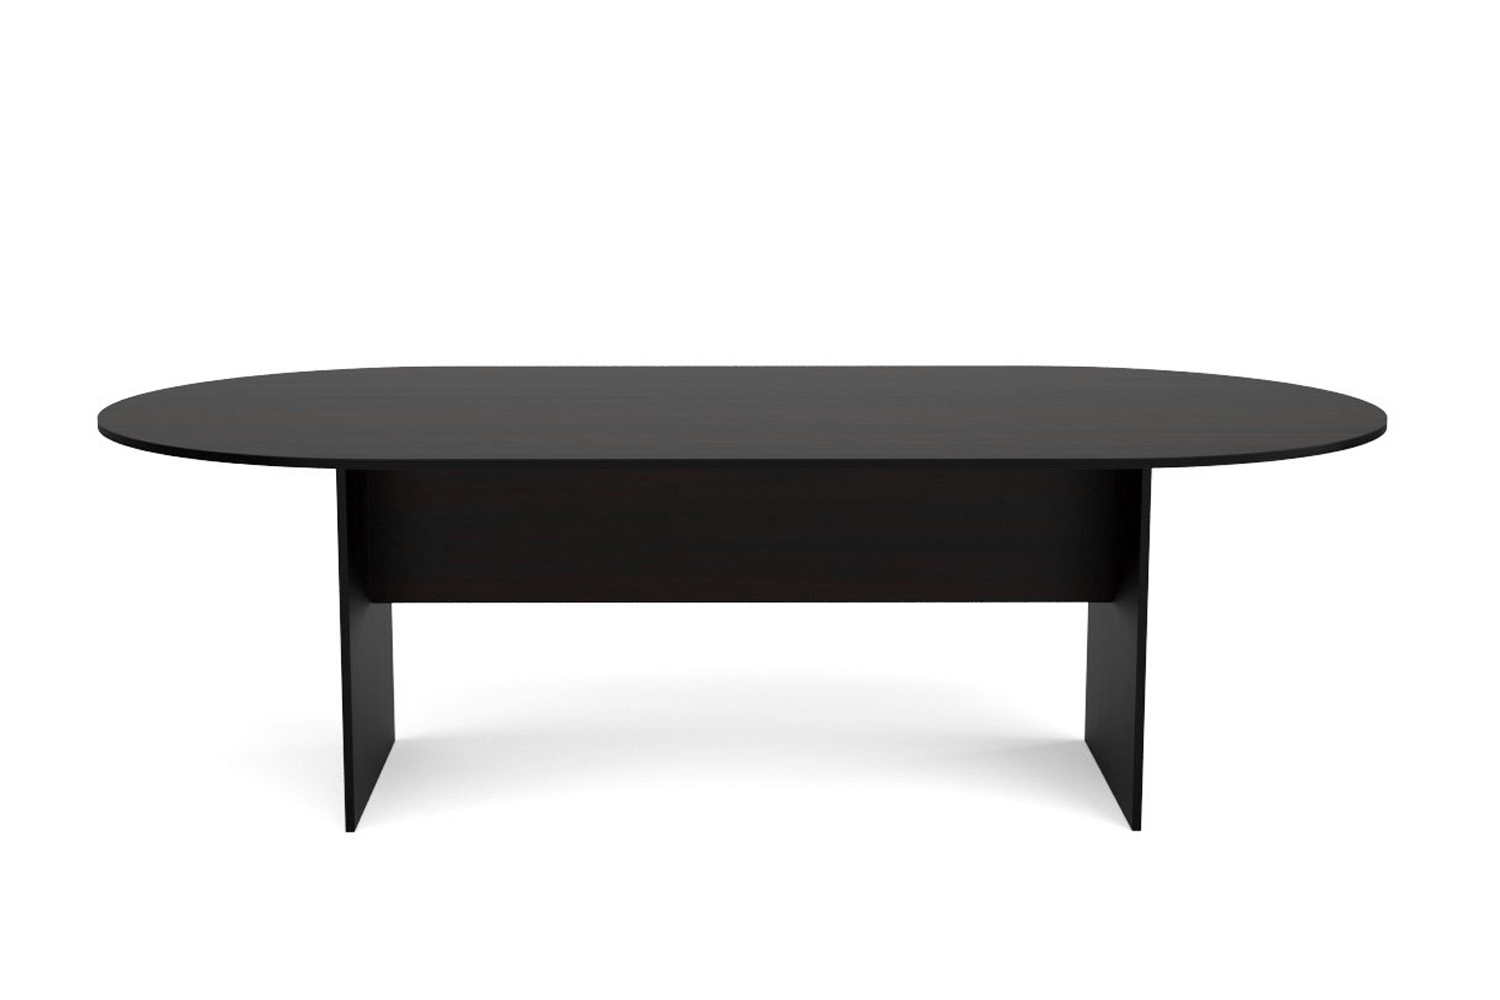 Product-Kai-Espresso-96-Racetrack-Conference-Table-2